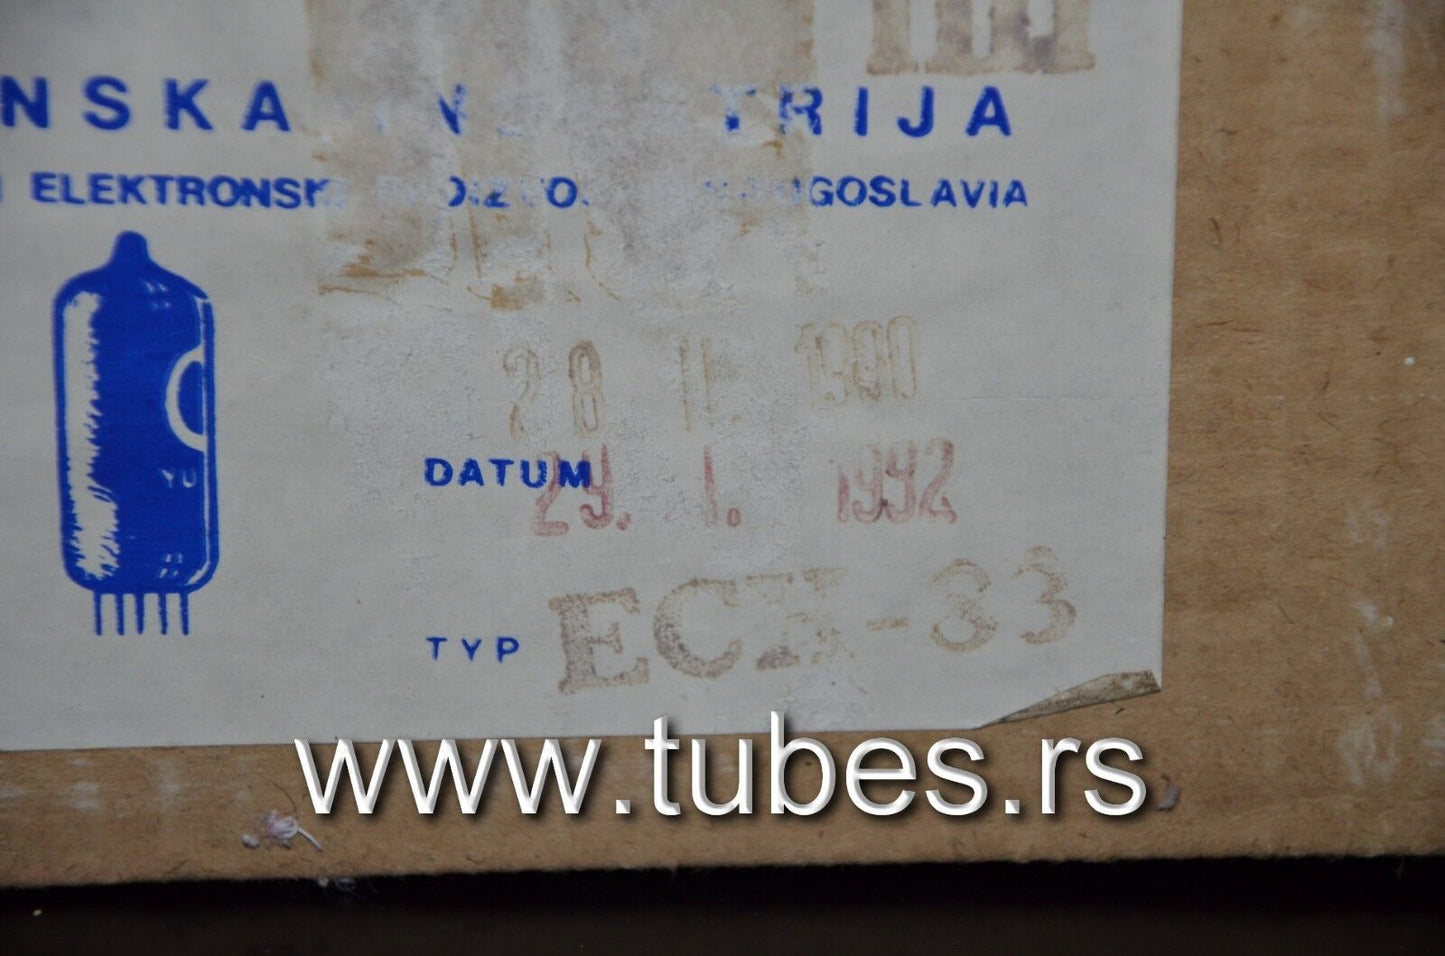 ECH83 EI Philips Yugoslavia 6DS8  CV2128 NOS NIB old type from early 70s